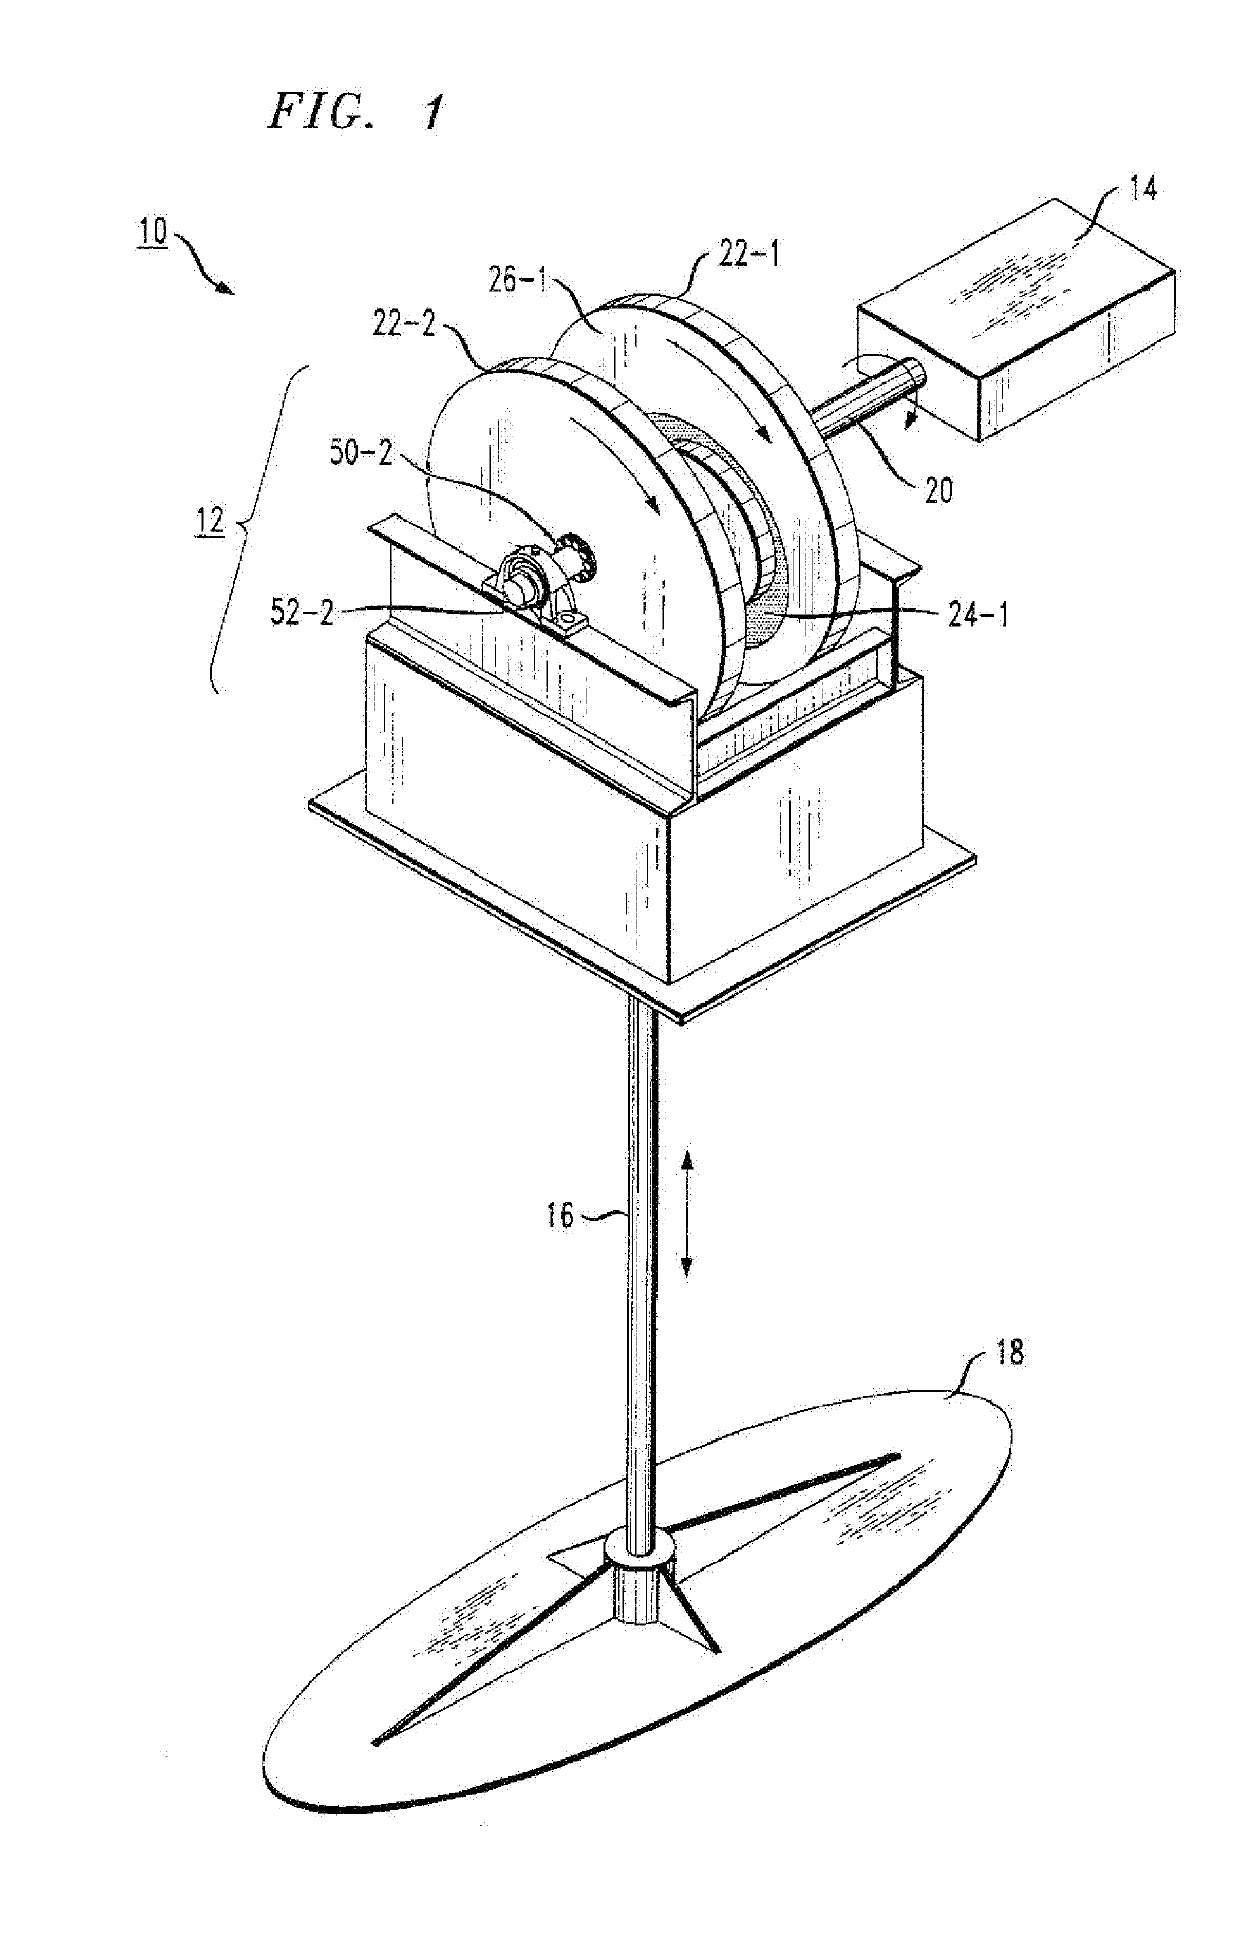 Apparatus for Converting Rotation Motion to Linear Reciprocating Motion